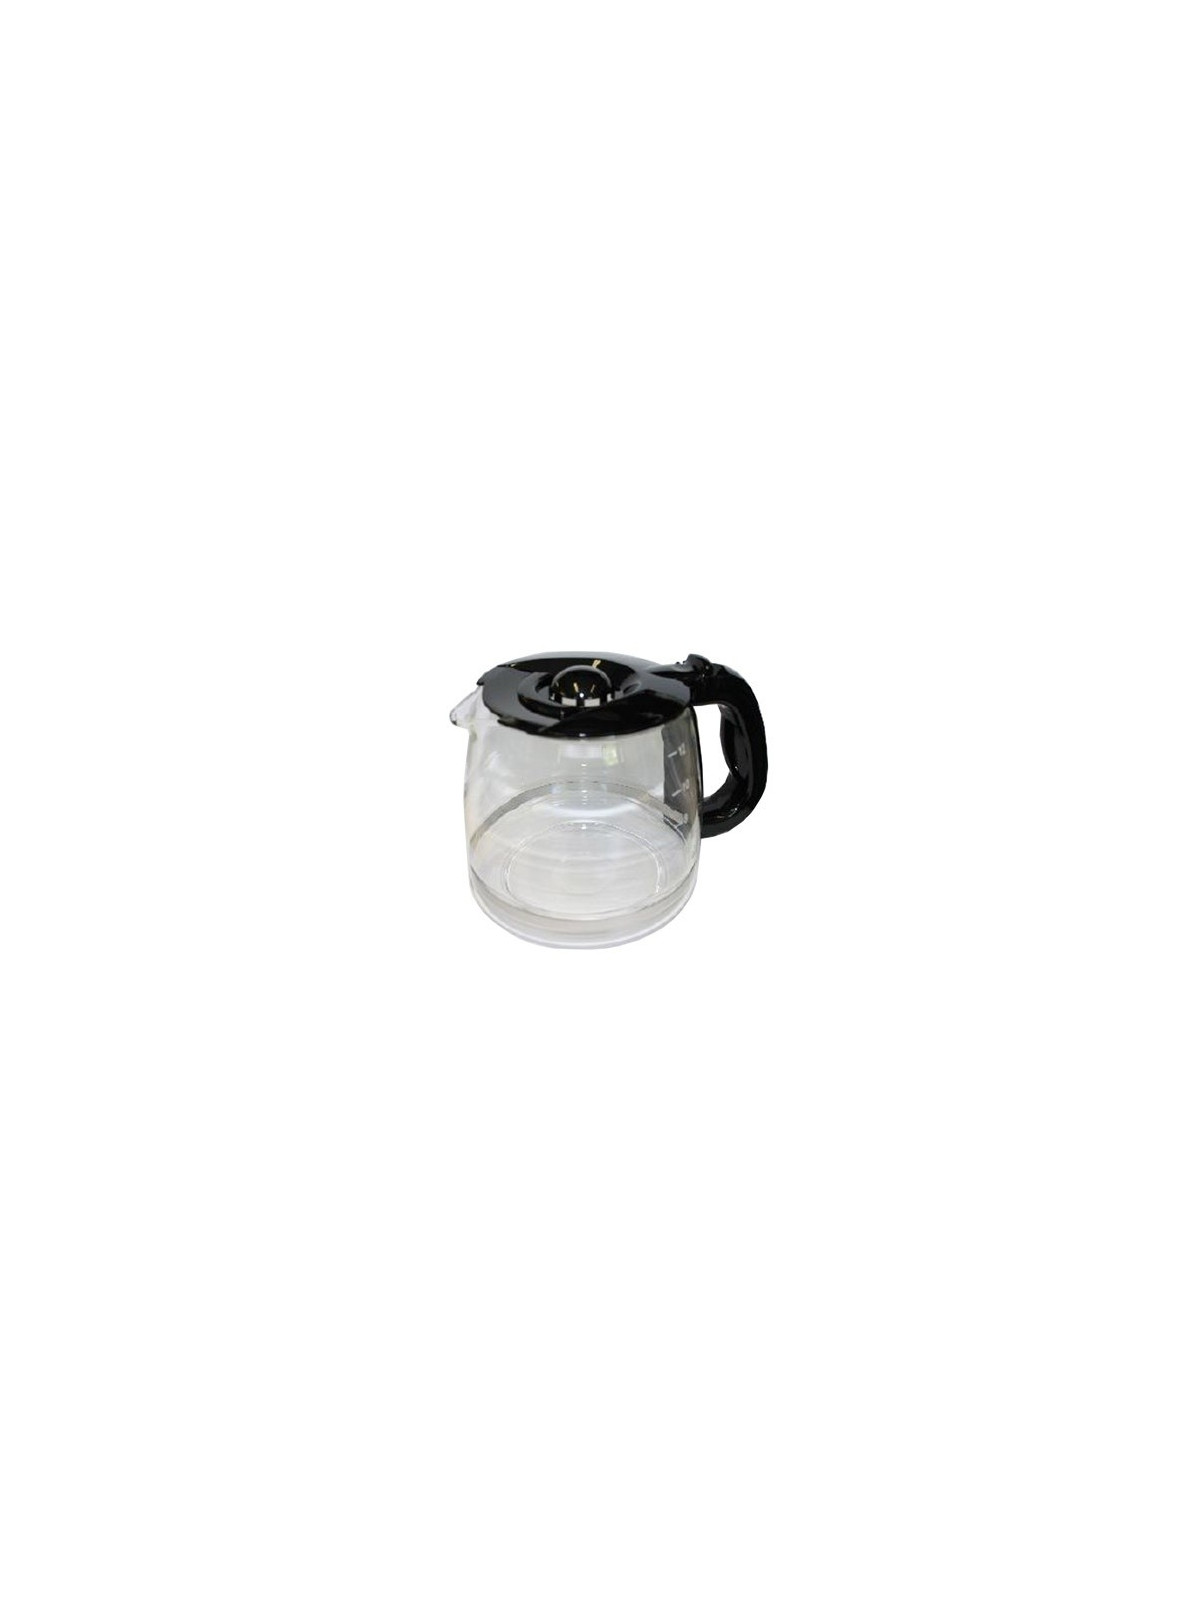 Verseuse Russell Hobbs Deco Classic Black 14421 - Cafetière